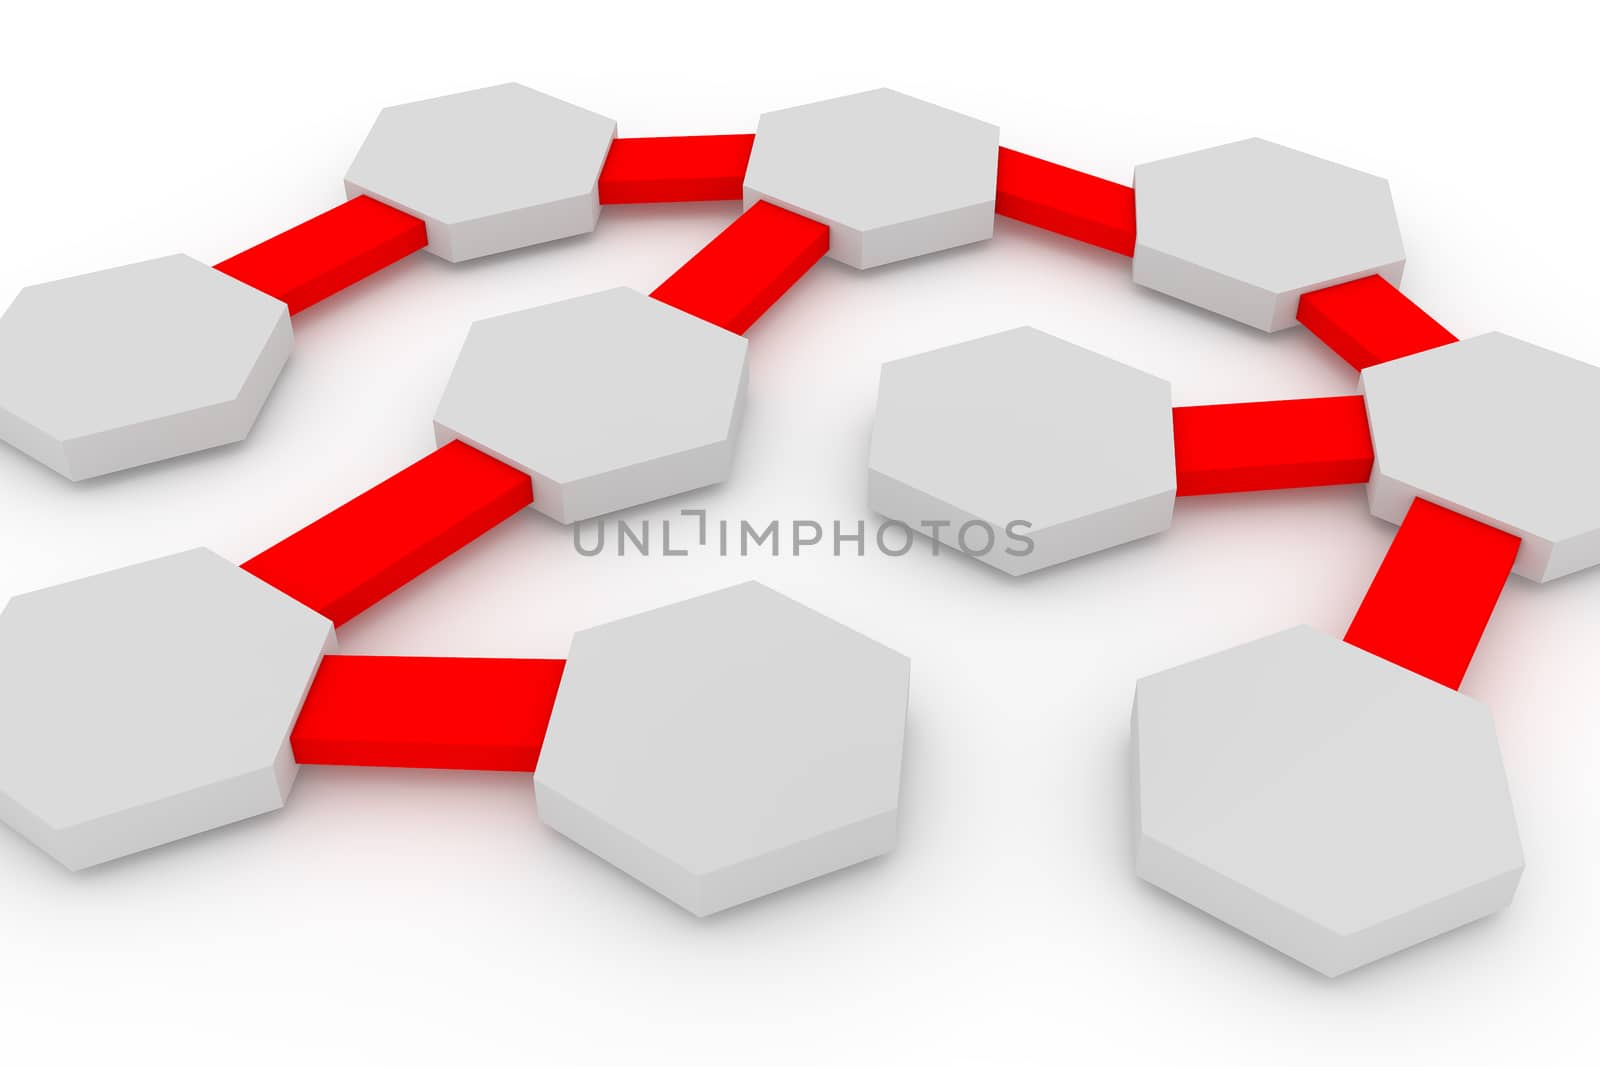  3d image of connection business 